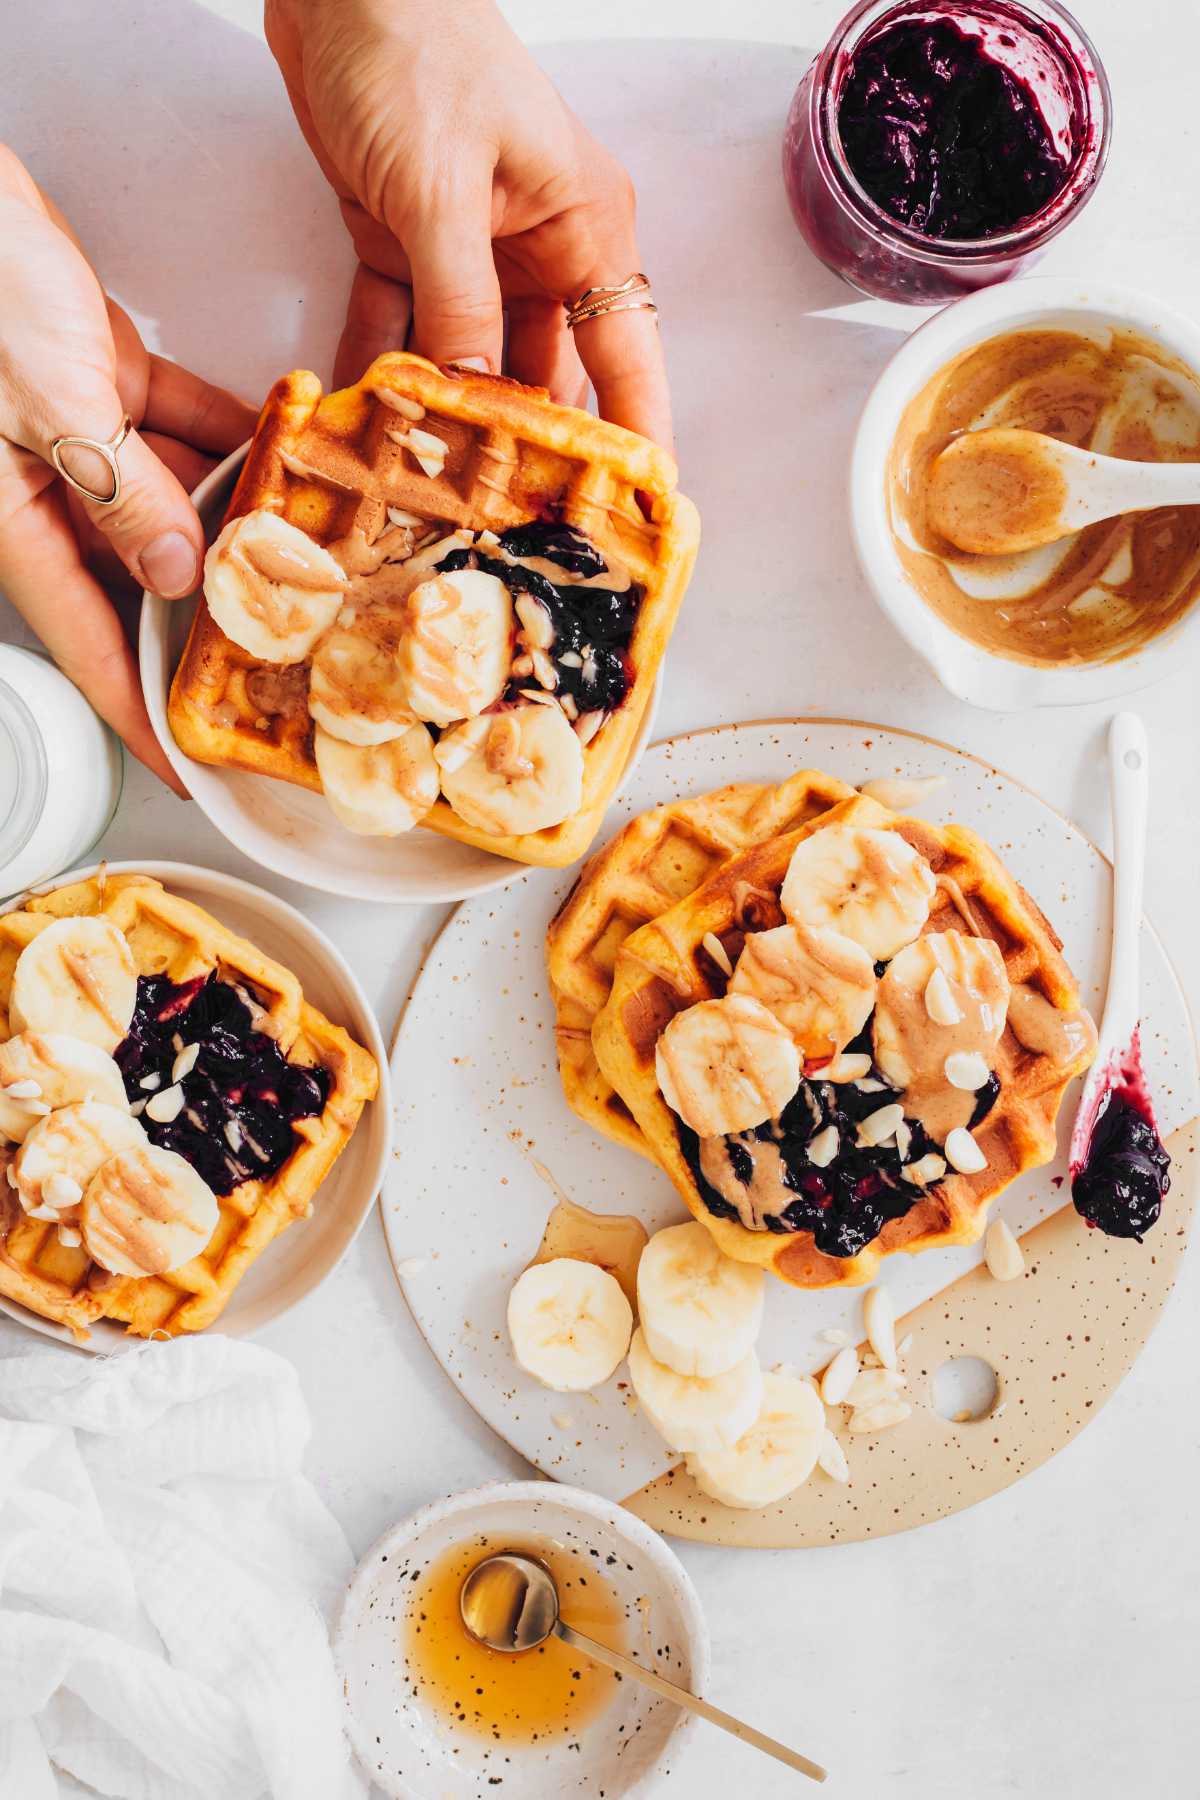 Vegan Sweet Potato Waffles with toppings on different plates